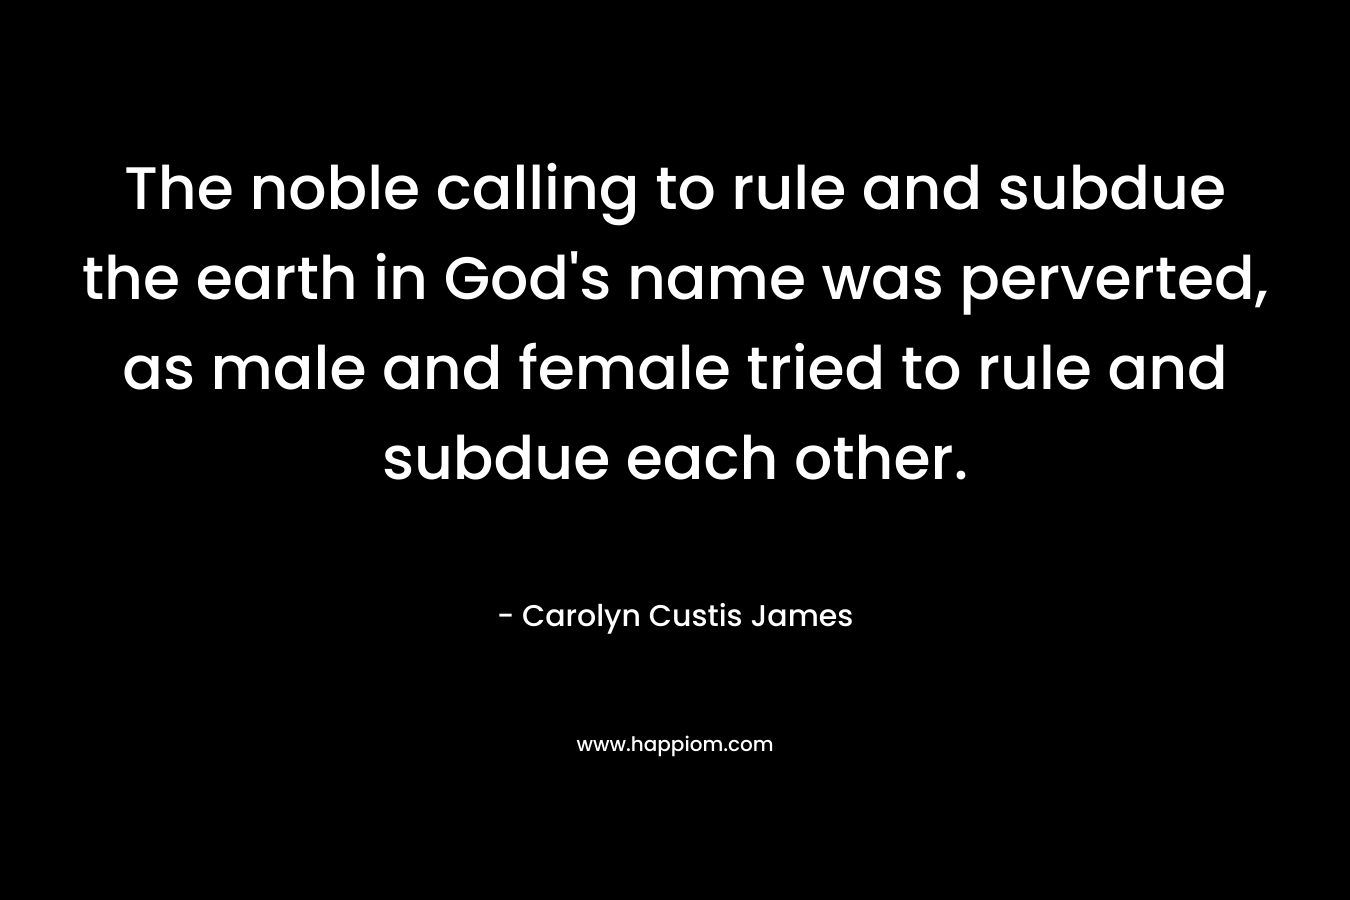 The noble calling to rule and subdue the earth in God’s name was perverted, as male and female tried to rule and subdue each other. – Carolyn Custis James